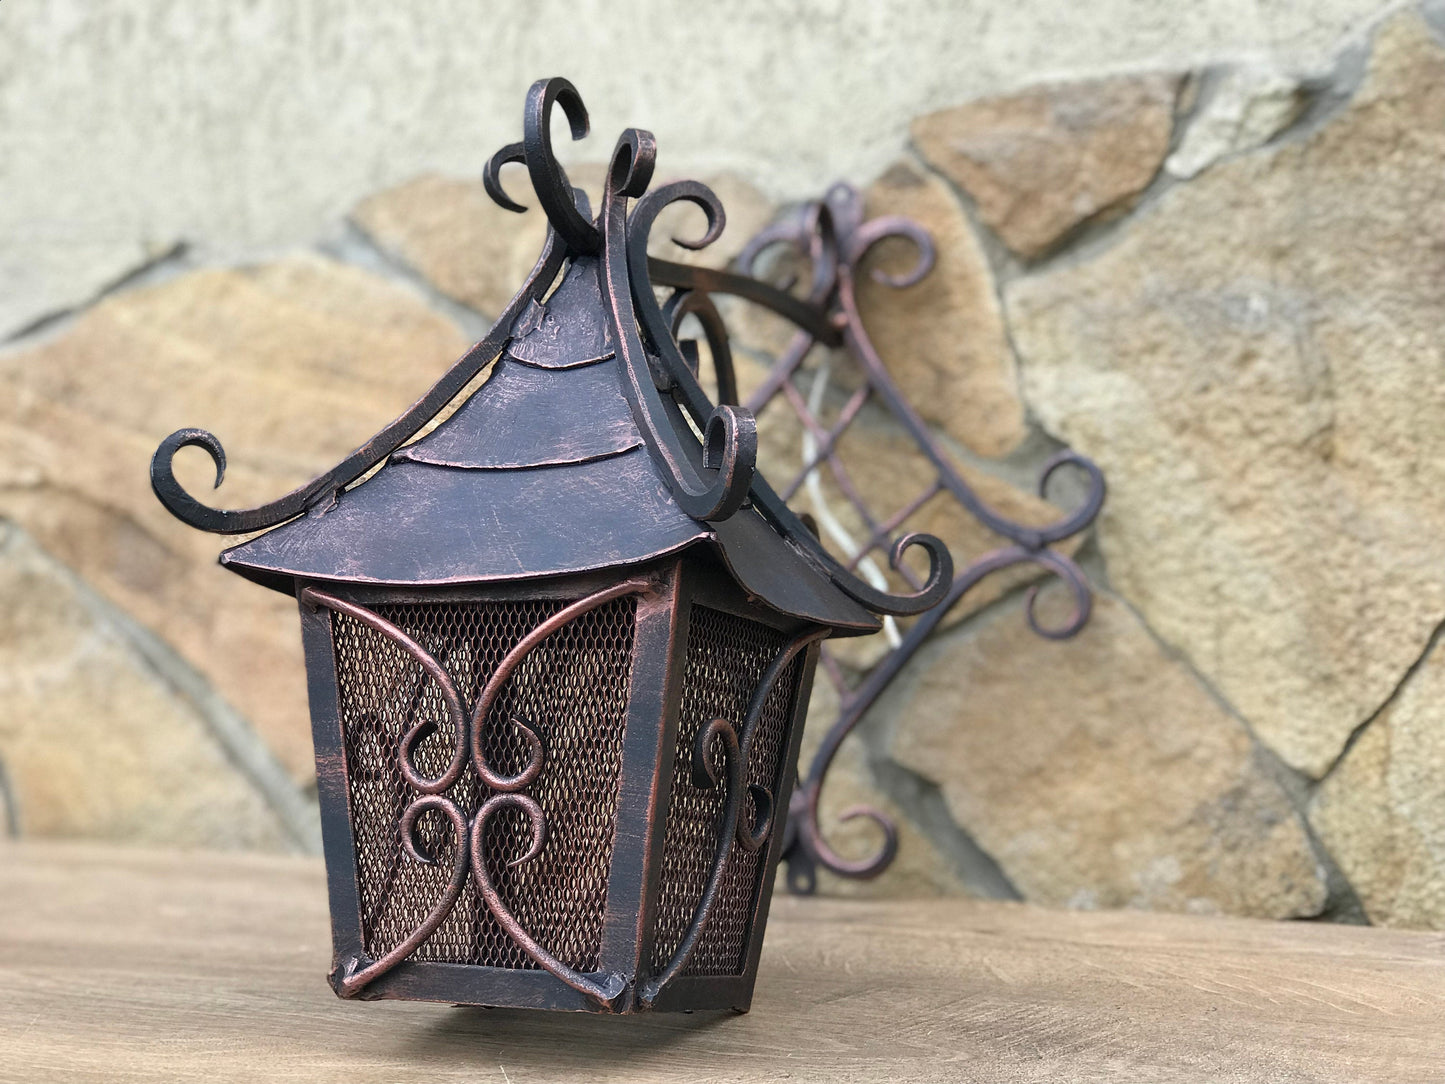 Wall lamp, hand forged lamp, wall sconce, iron lamp, hand forged lantern, garden lamp, porch lamp, candelabra, chandelier, light fixture